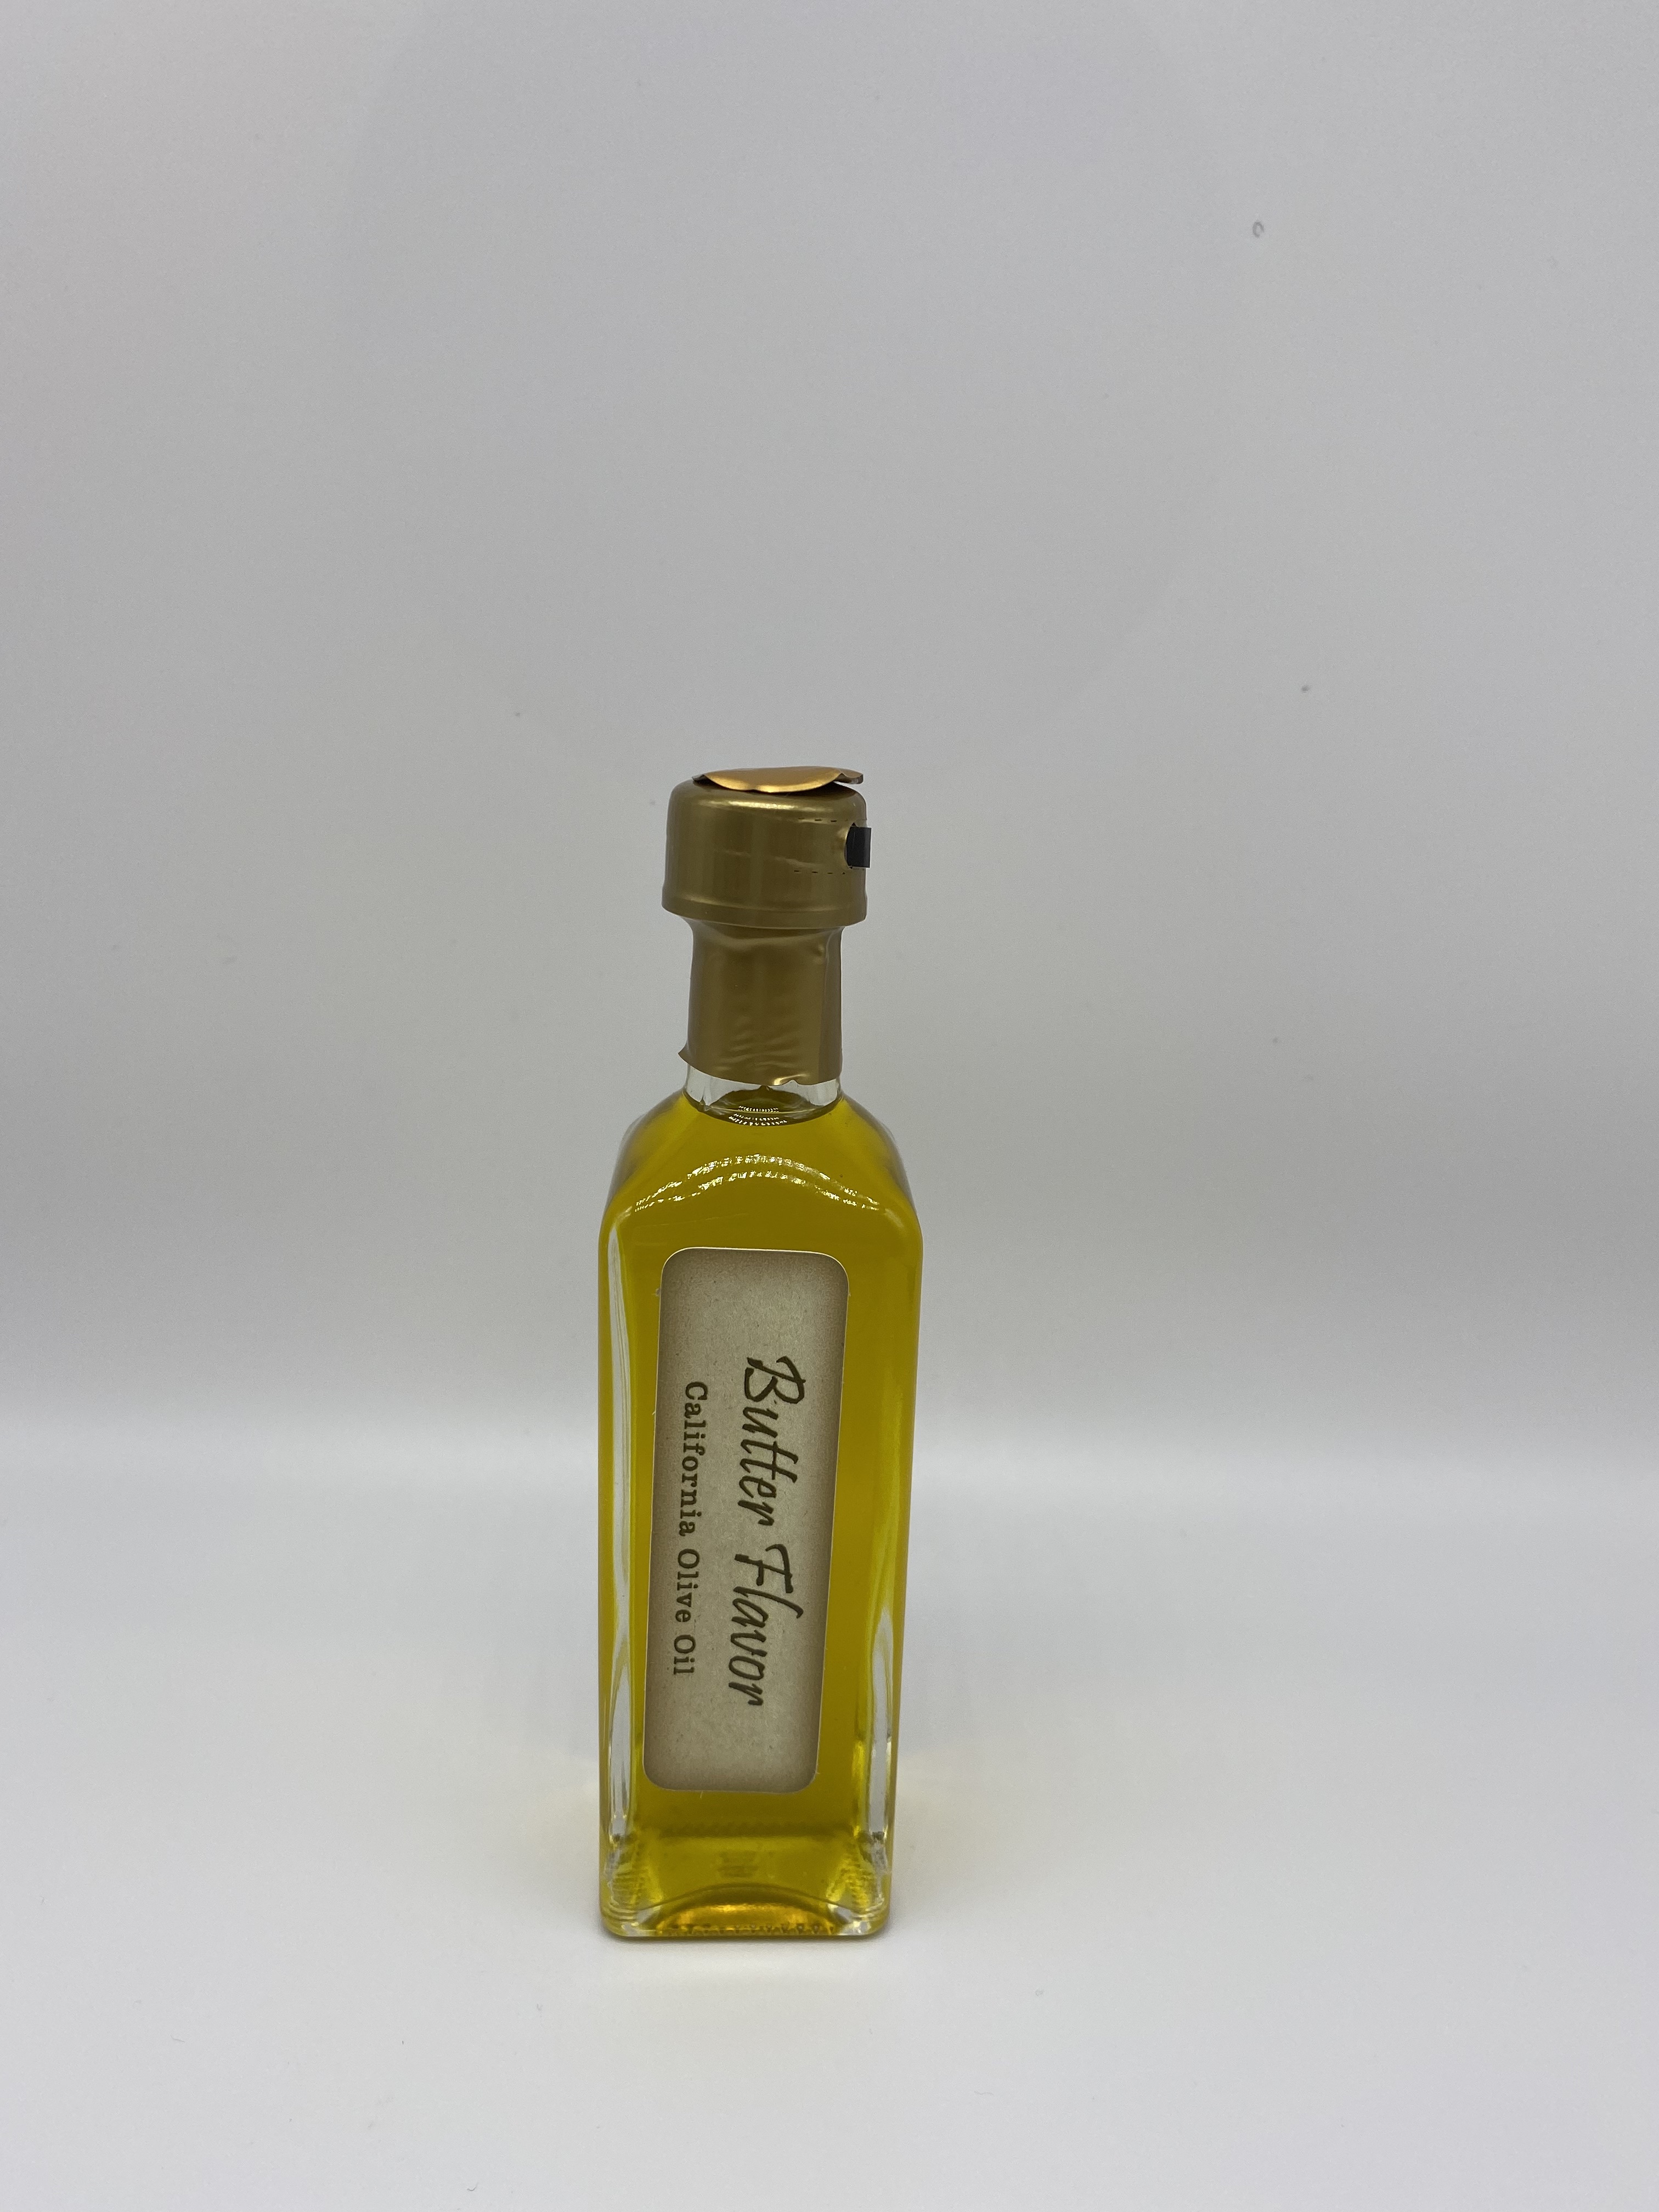 Product Image for Butter Flavored Olive Oil